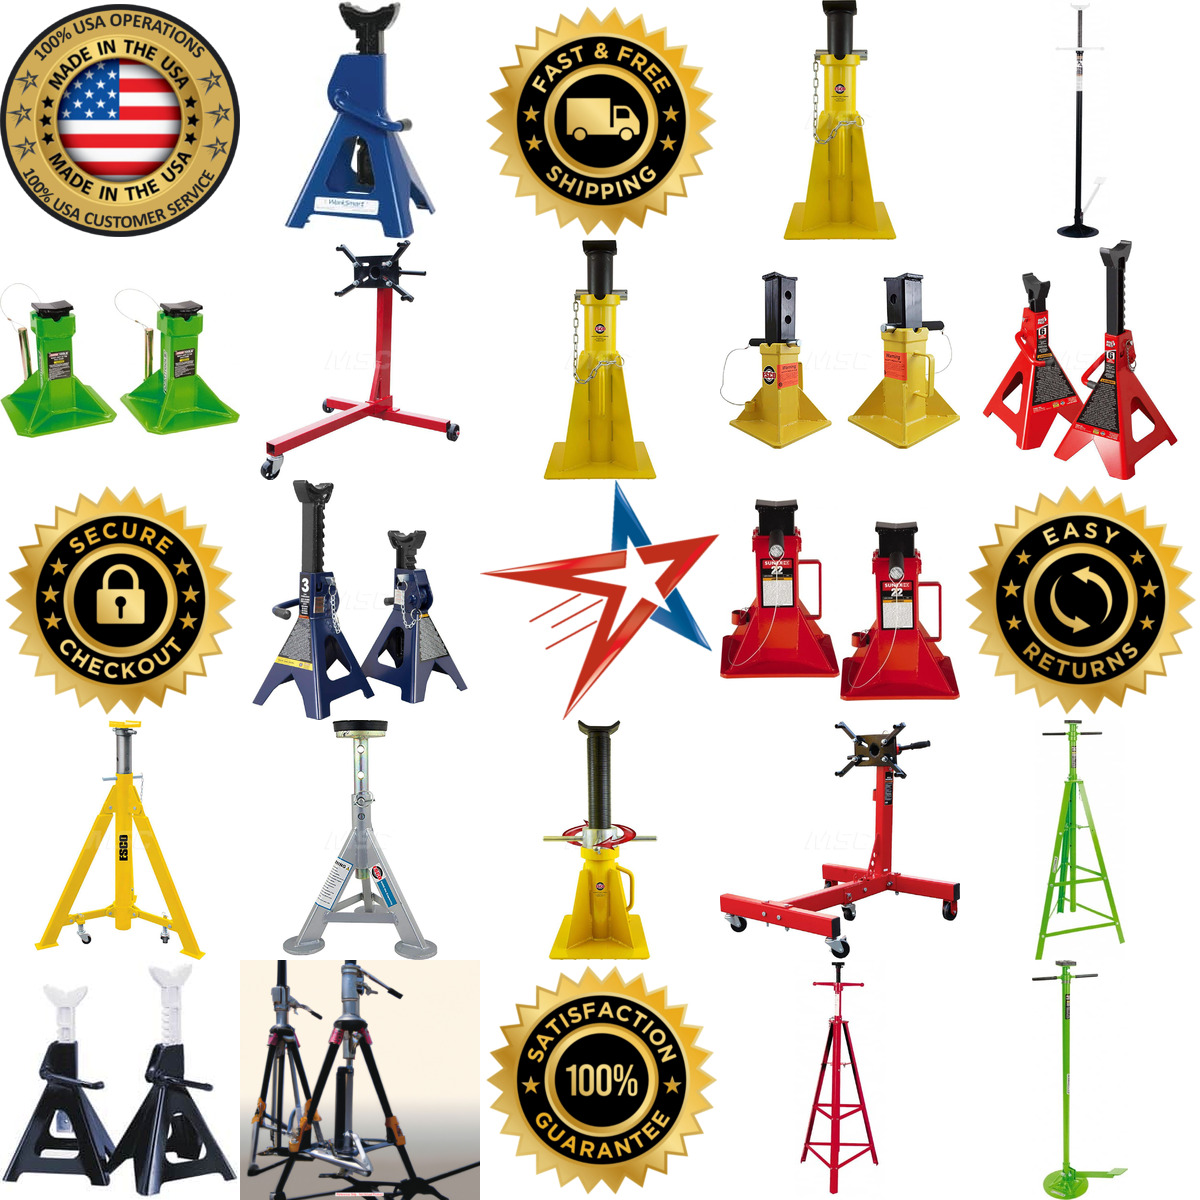 A selection of Jack Stands and Tripods products on GoVets